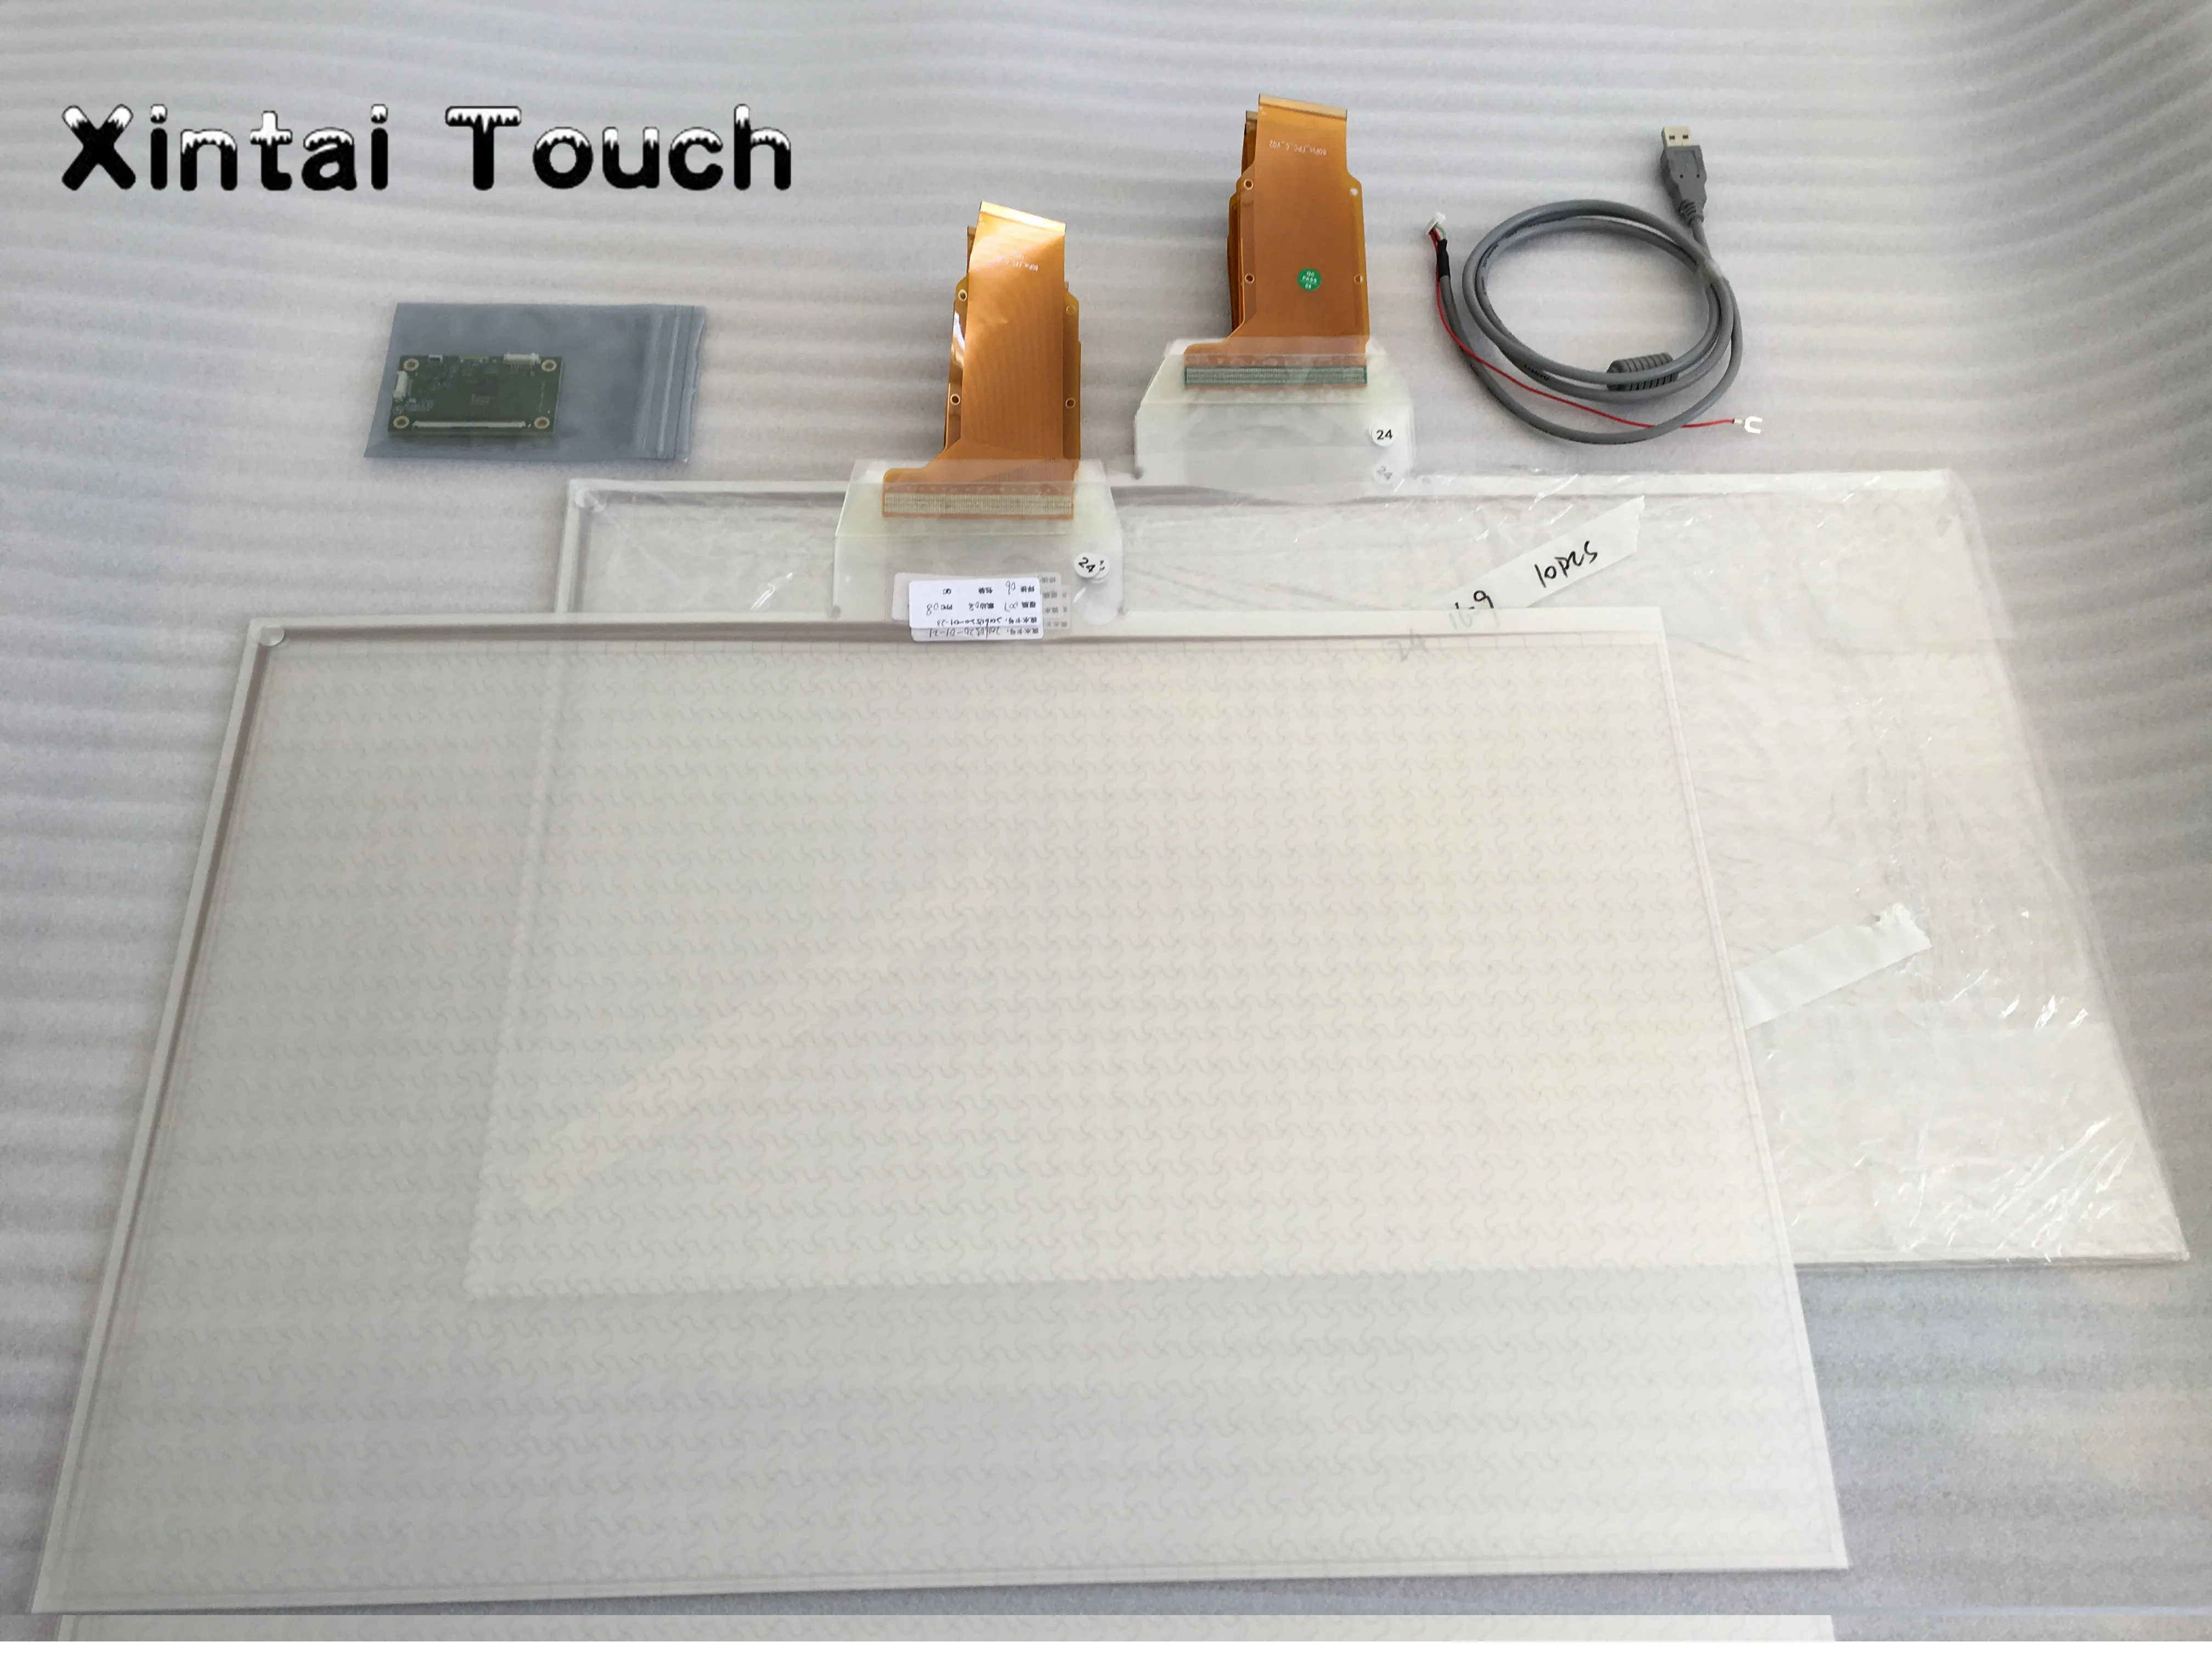 

On sale! lowest price 19" Interactive Touch Foil, 10 Points Touch Foil Film and USB Multi Touch Foil for touch kiosk, table etc